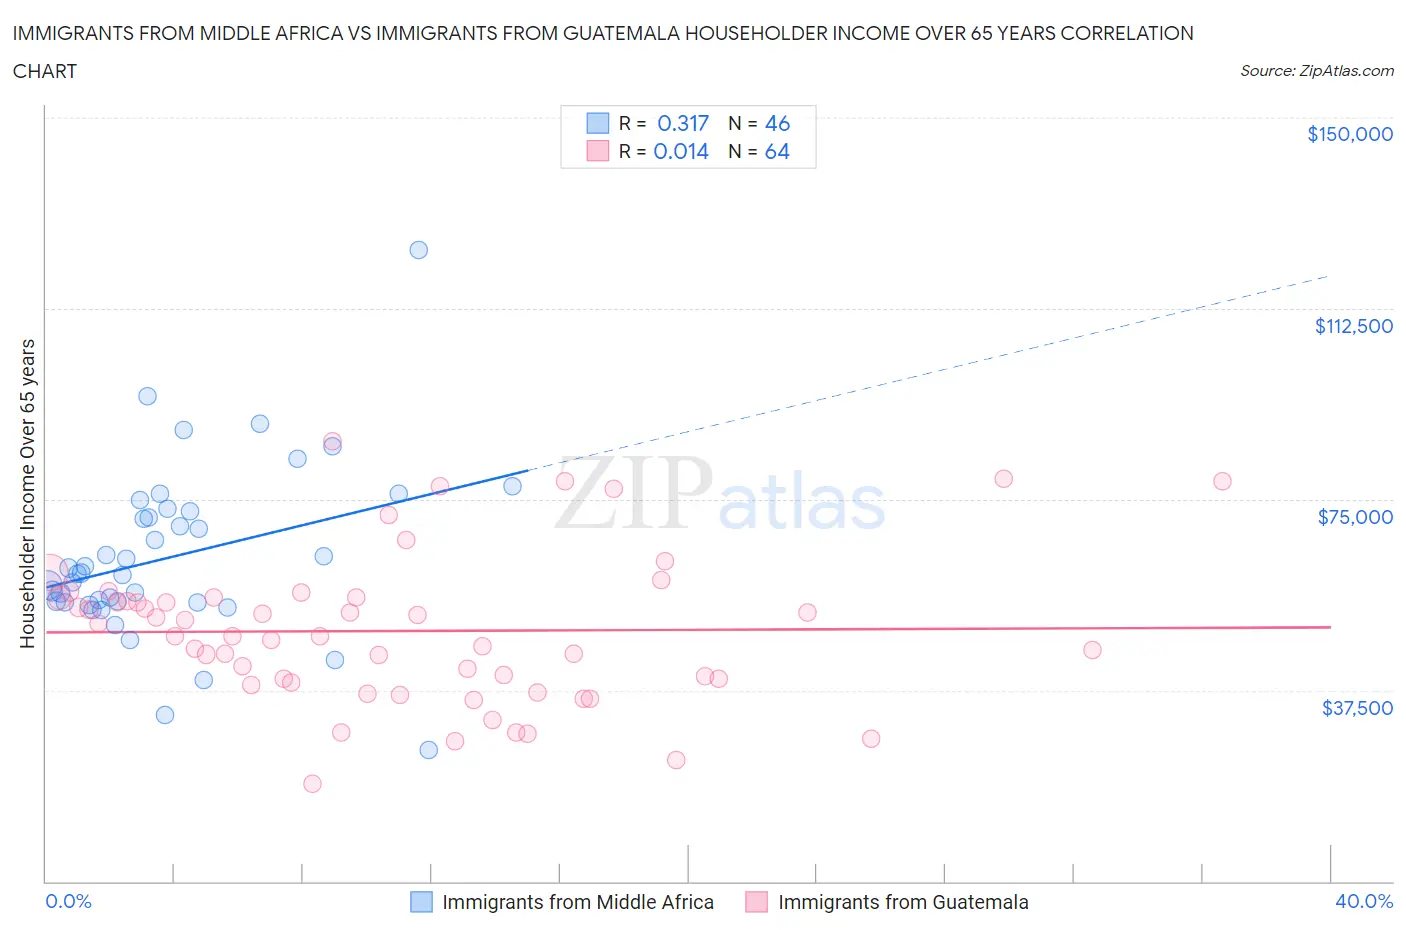 Immigrants from Middle Africa vs Immigrants from Guatemala Householder Income Over 65 years